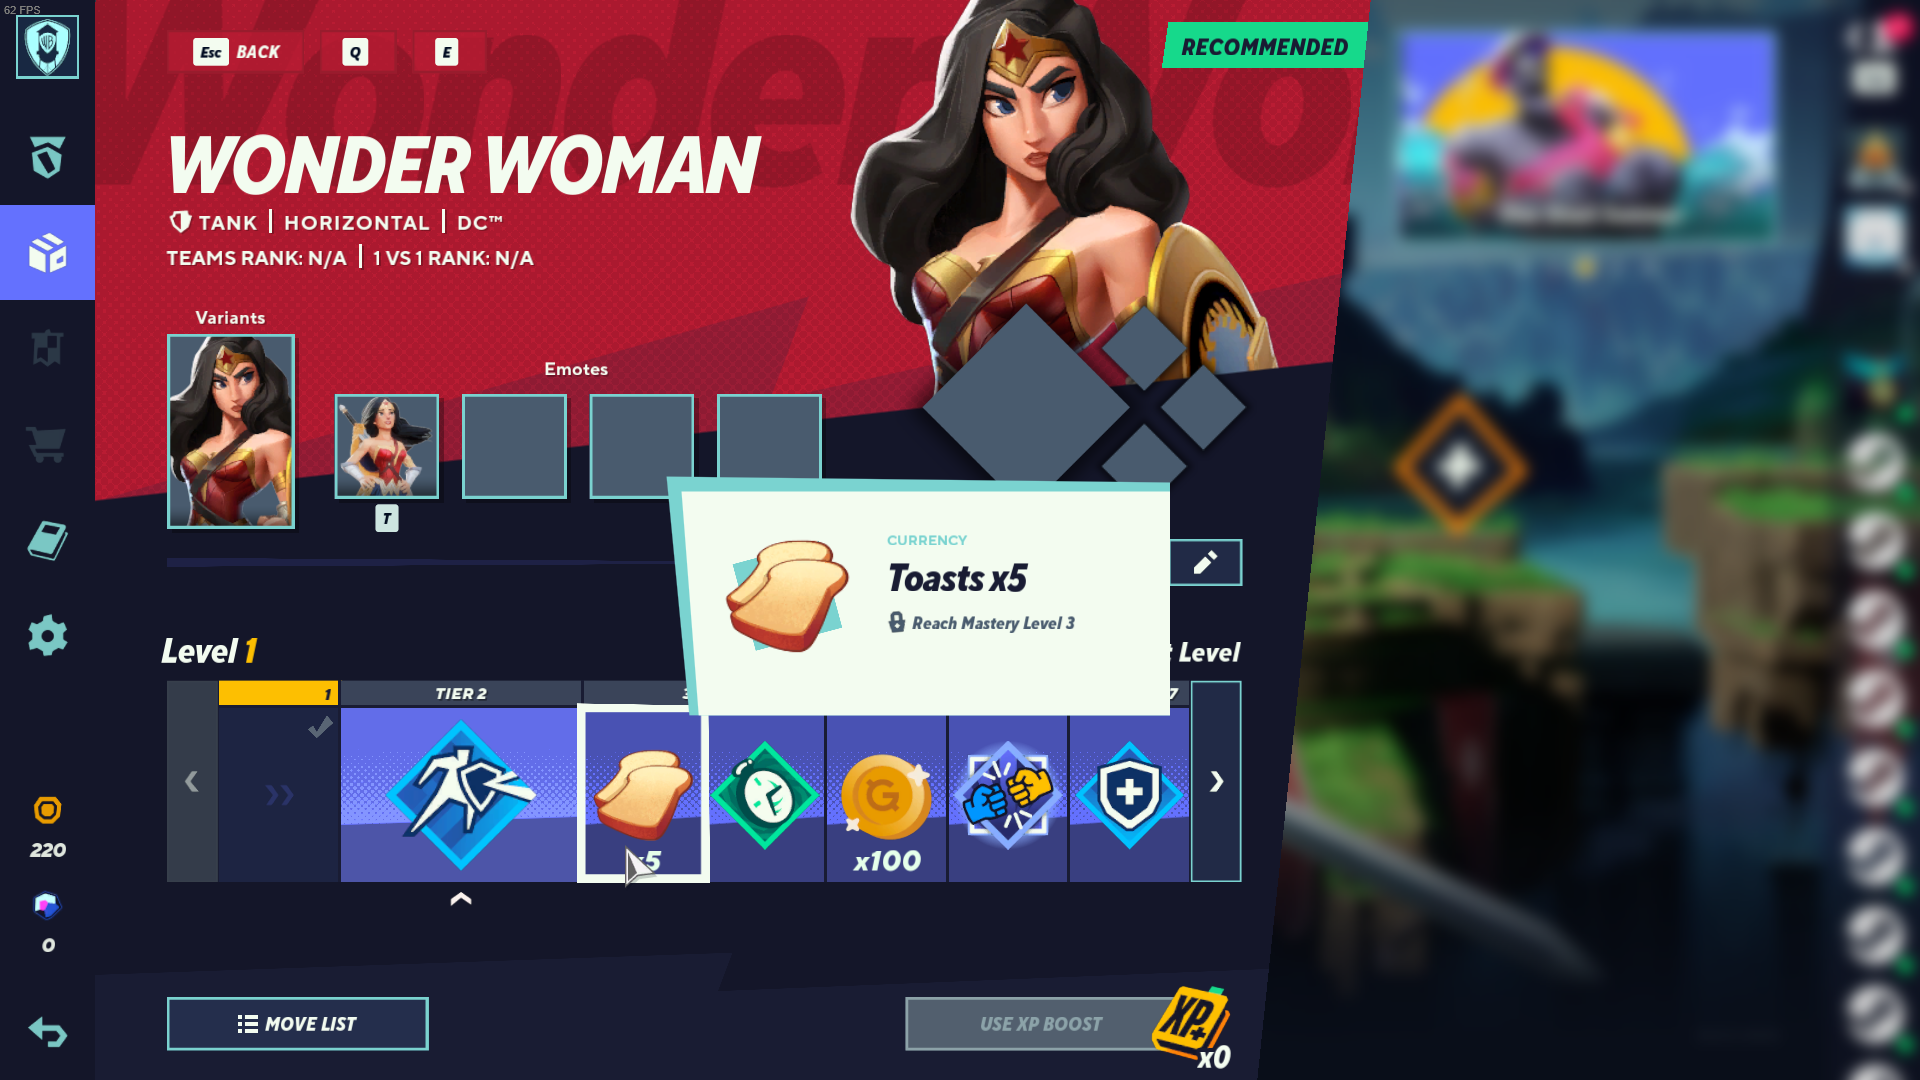 Wonder Woman's pass in MultiVersus is shown, which includes 5x toast at level 3.